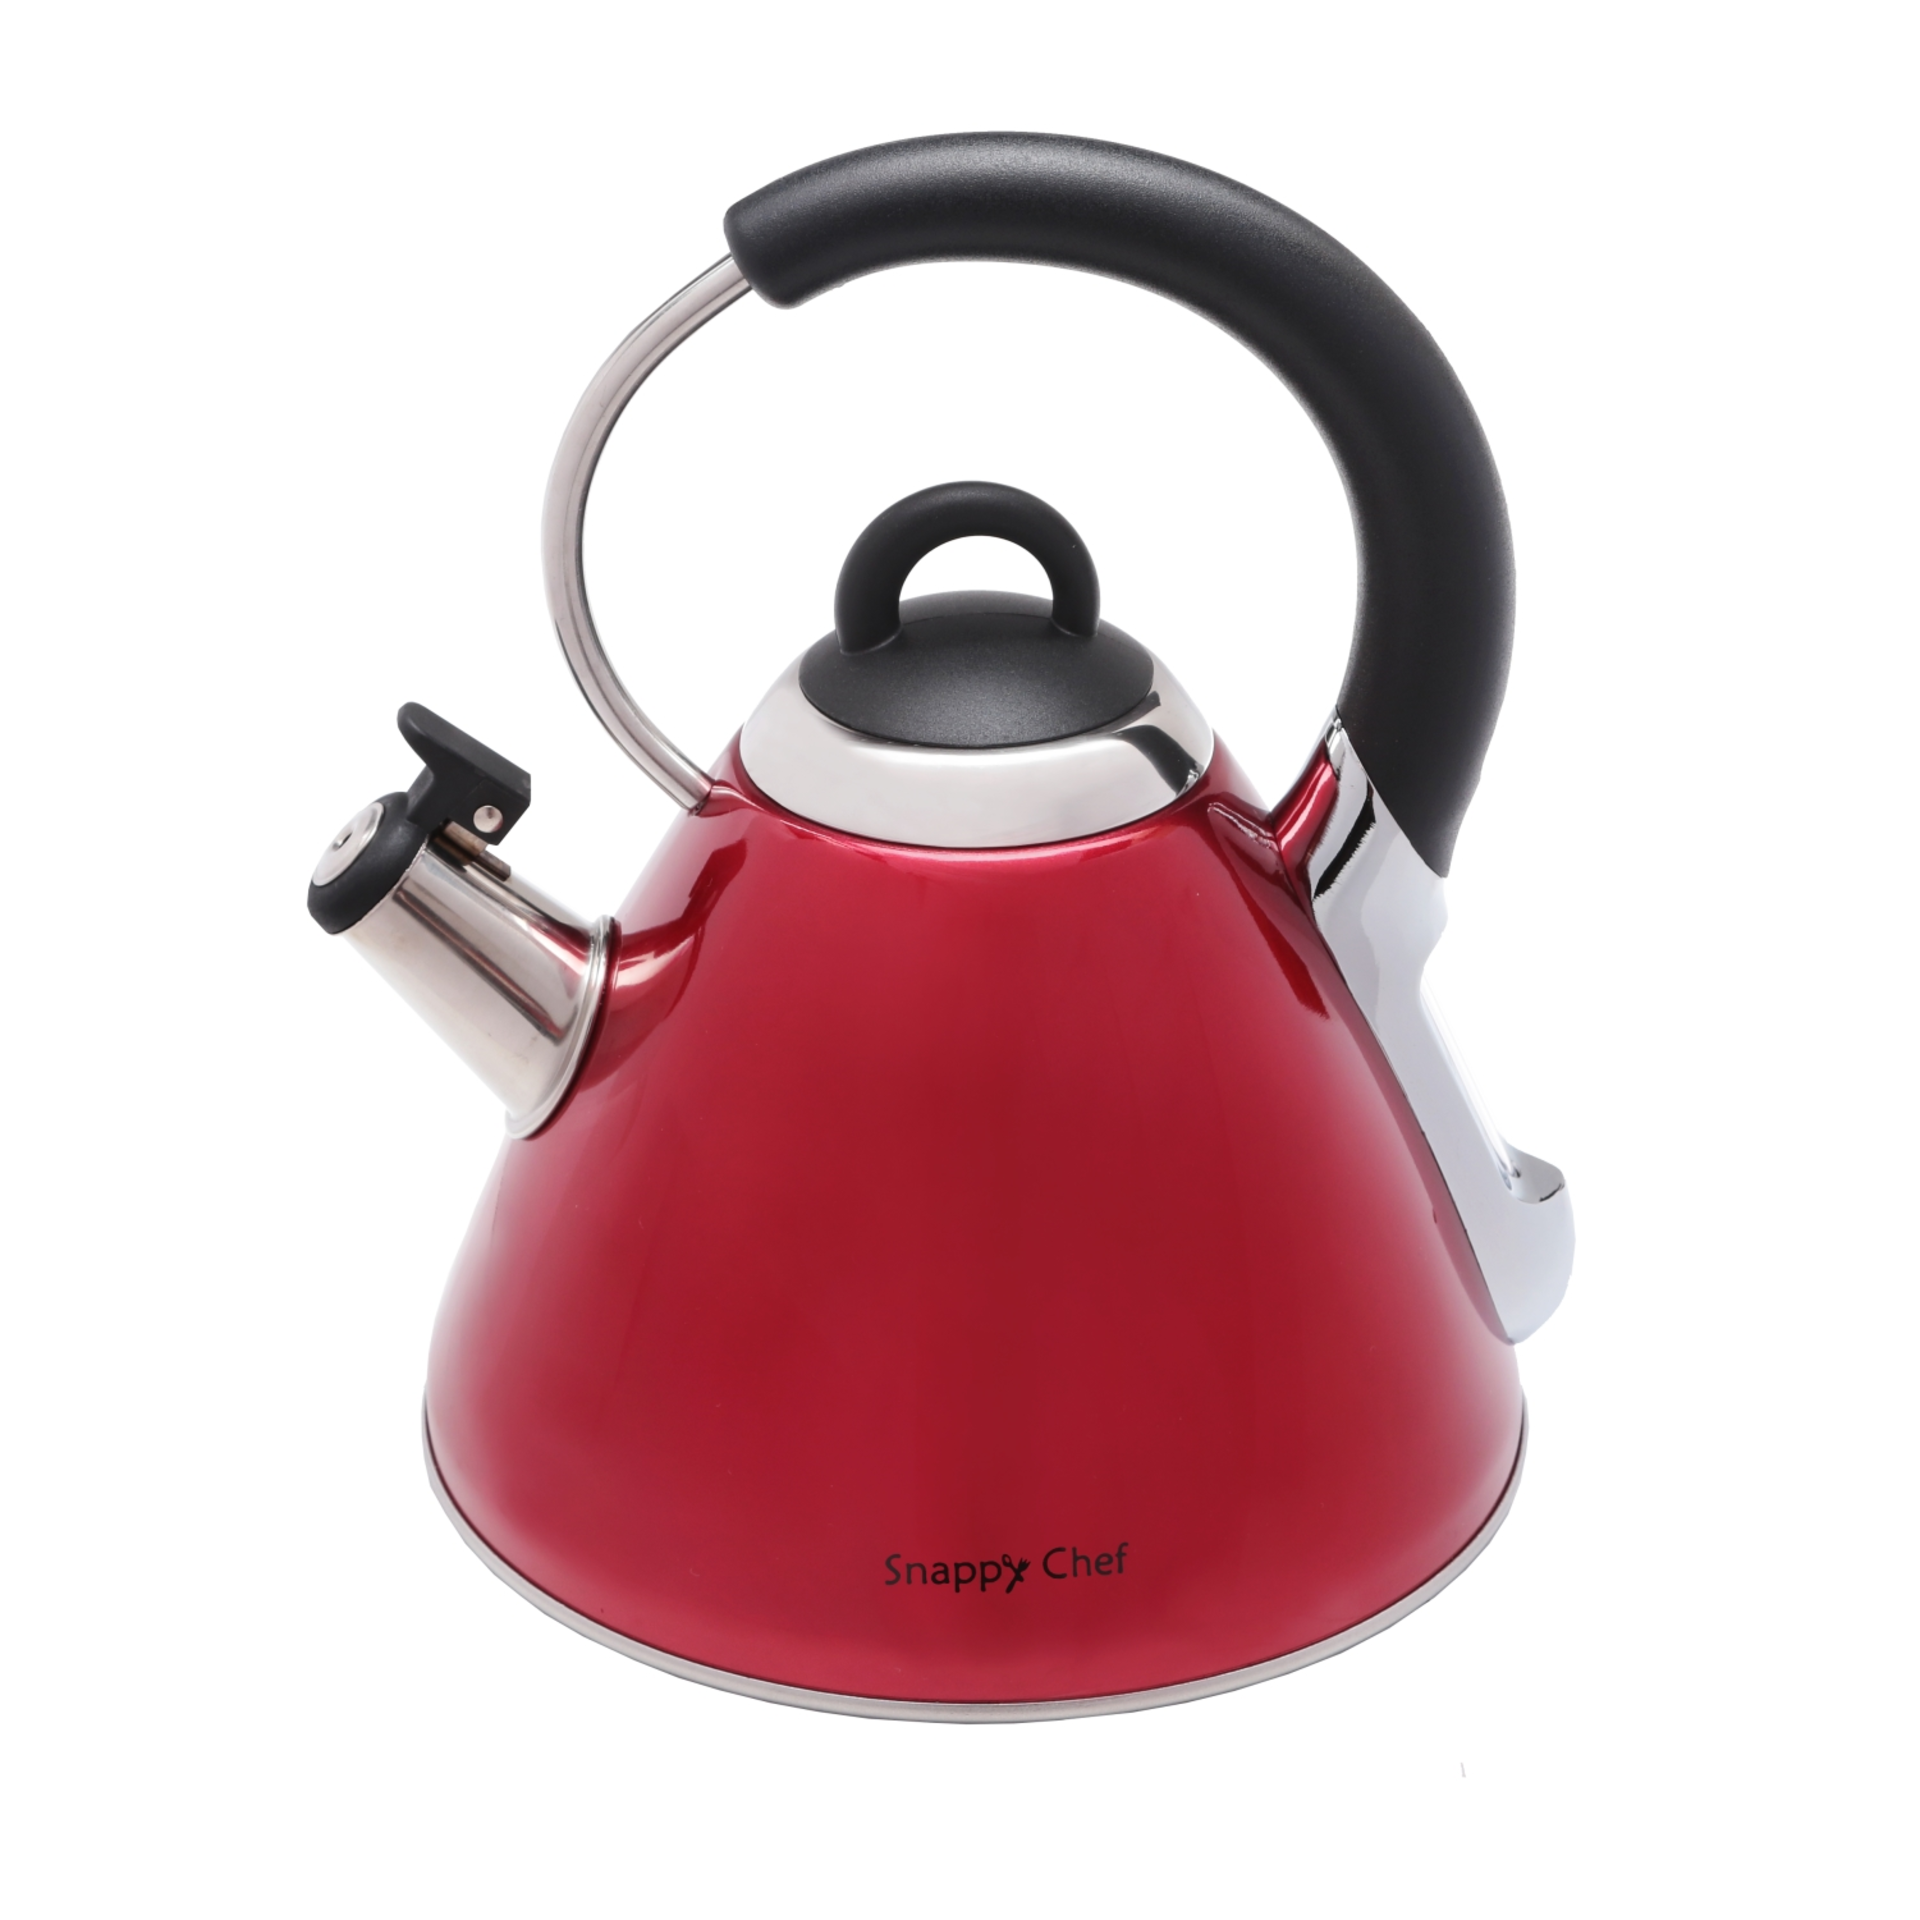 Snappy Chef 2.2 Litre Red Whistling Kettle - HiFi Corporation